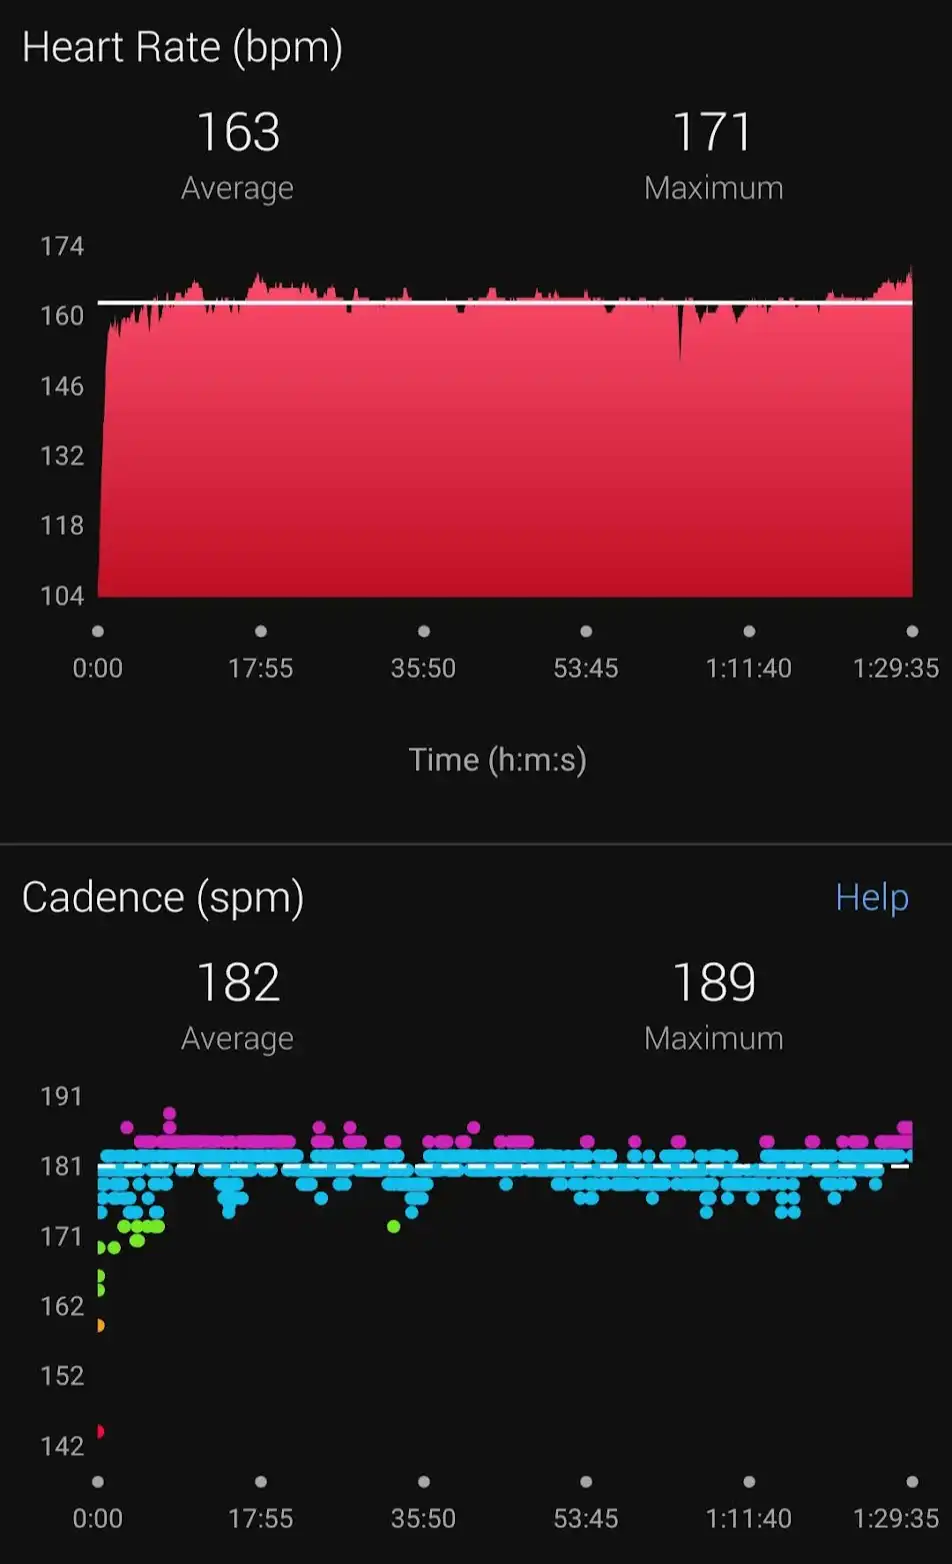 almost straight line for heart rate and cadence